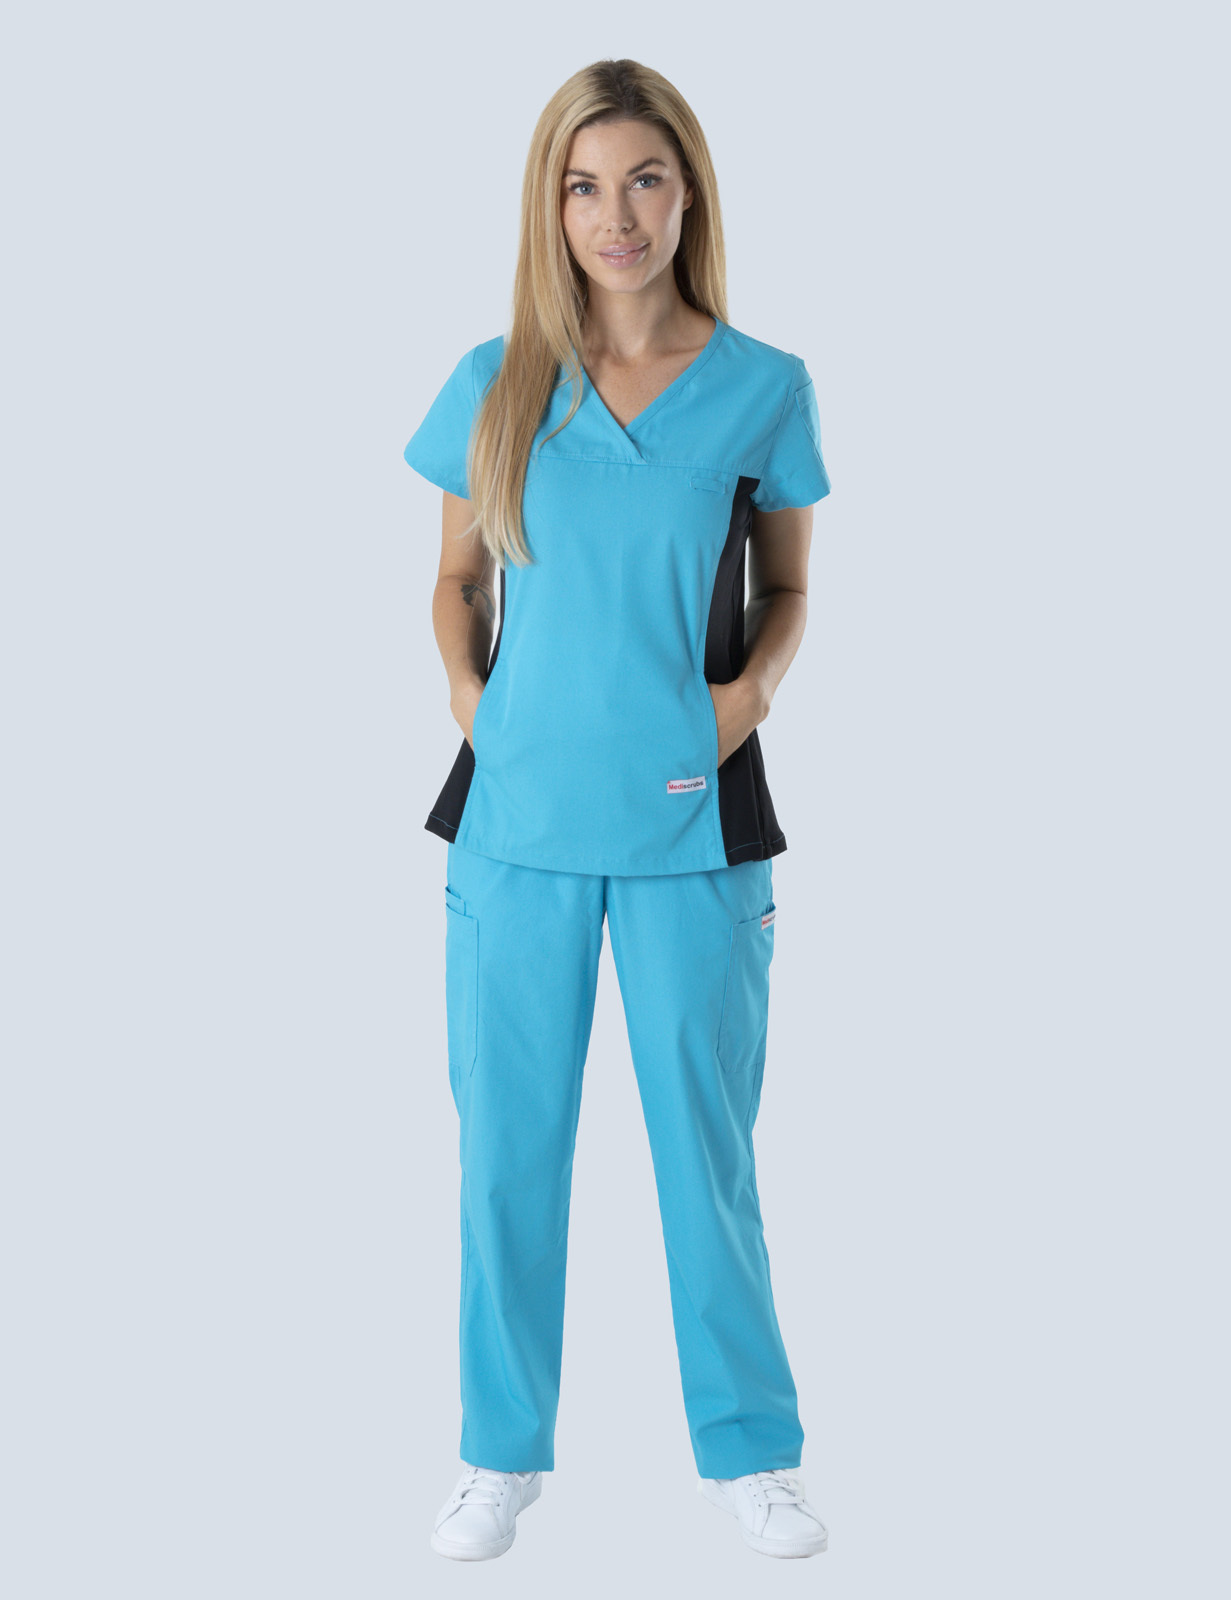 Women's Fit Solid Scrub Top With Spandex Panel - Aqua - 2X Large